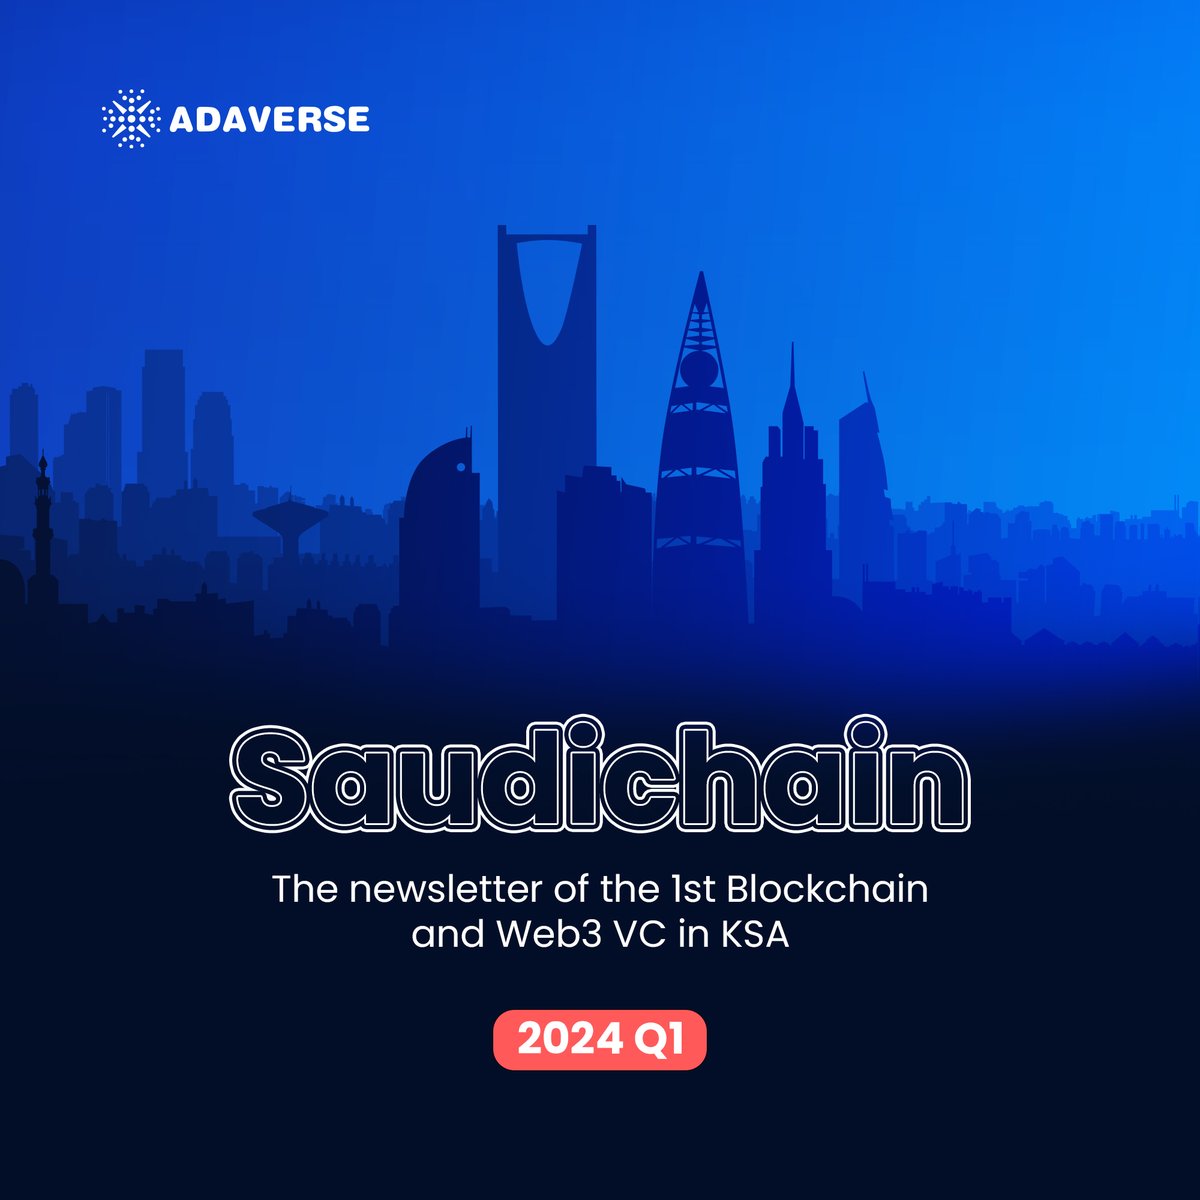 Exciting News! 🌟 Saudichain, our latest quarterly newsletter straight from Saudi Arabia, is here! 🚀 Dive into the latest on Adaverse investments, partnerships, and pivotal news from KSA. 🔗SUBSCRIBE HERE: shorturl.at/Y0129 #Adaverse #MiddleEast #Newsletter #Q1Saudichain